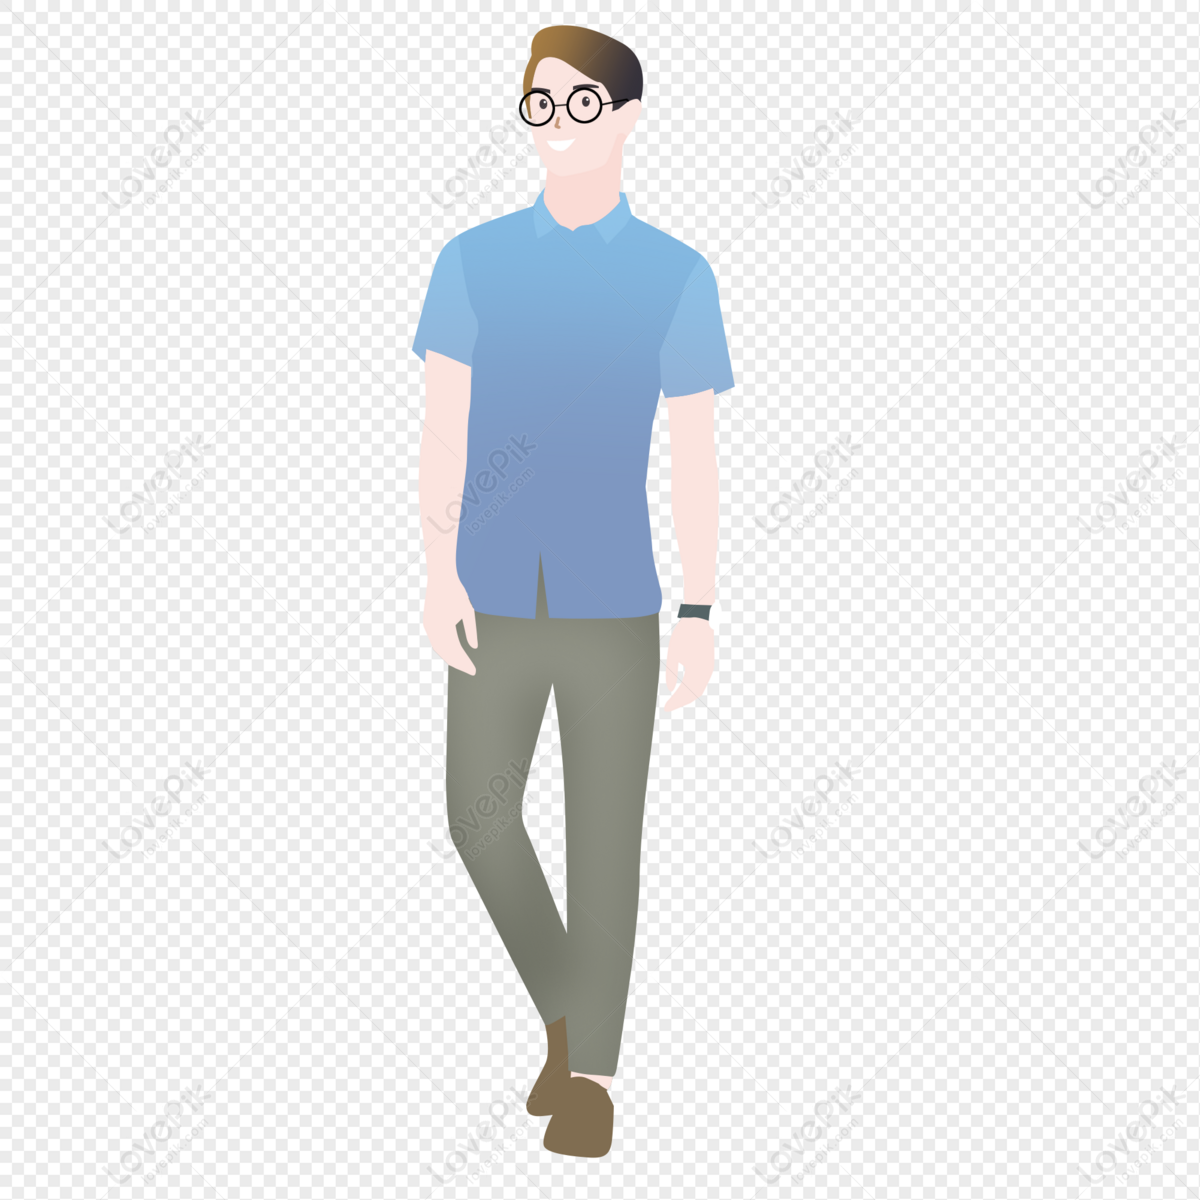 Business Male Employee PNG Transparent Image And Clipart Image For Free ...